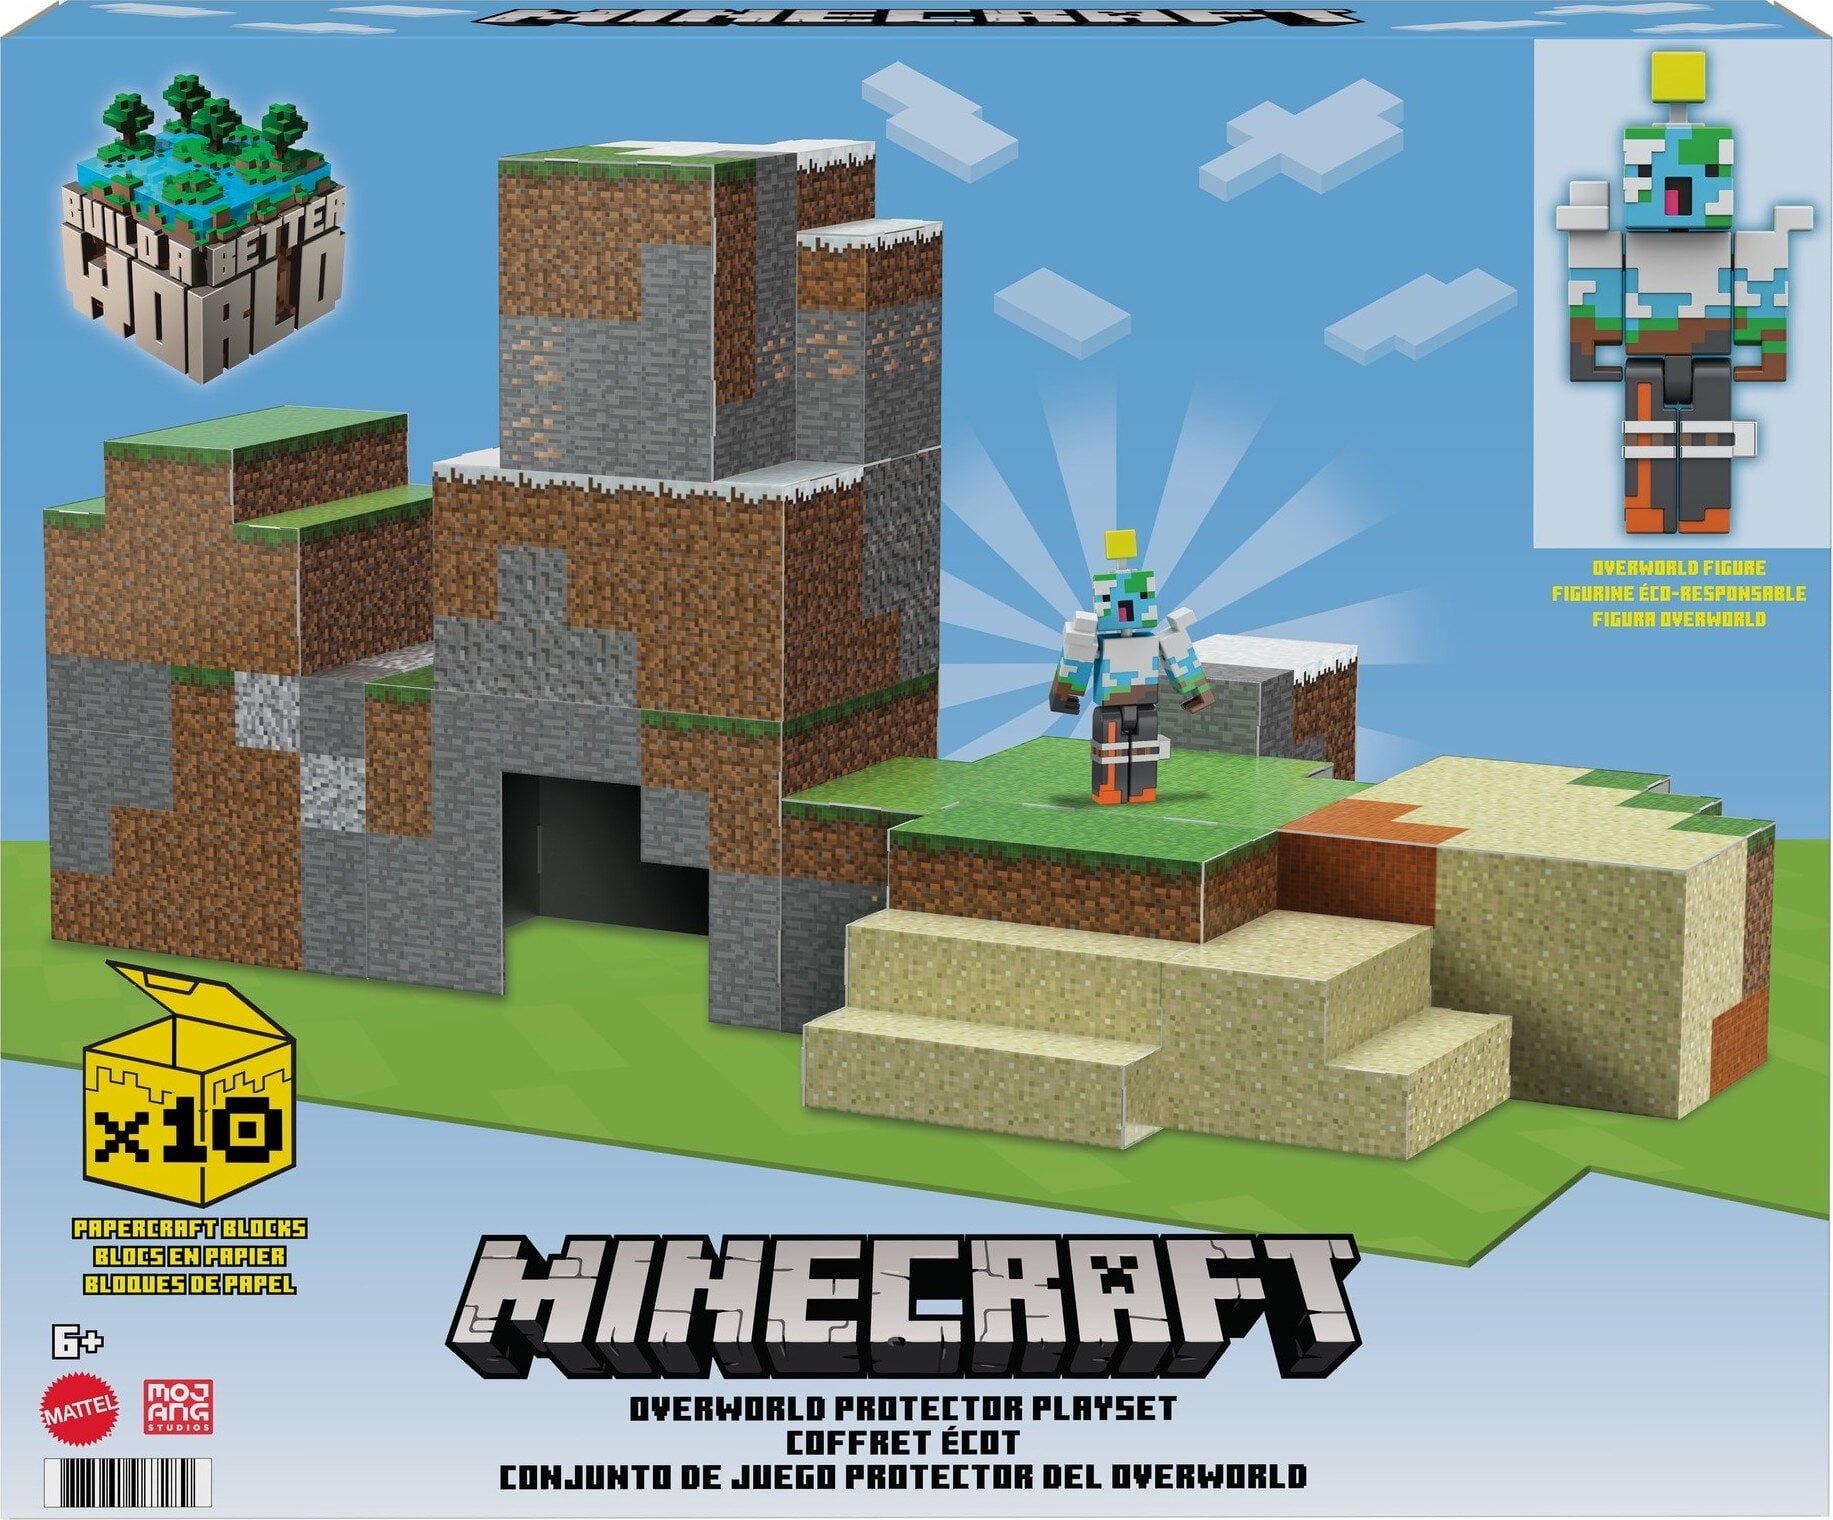 Screenless Minecraft Activity with Papercraft